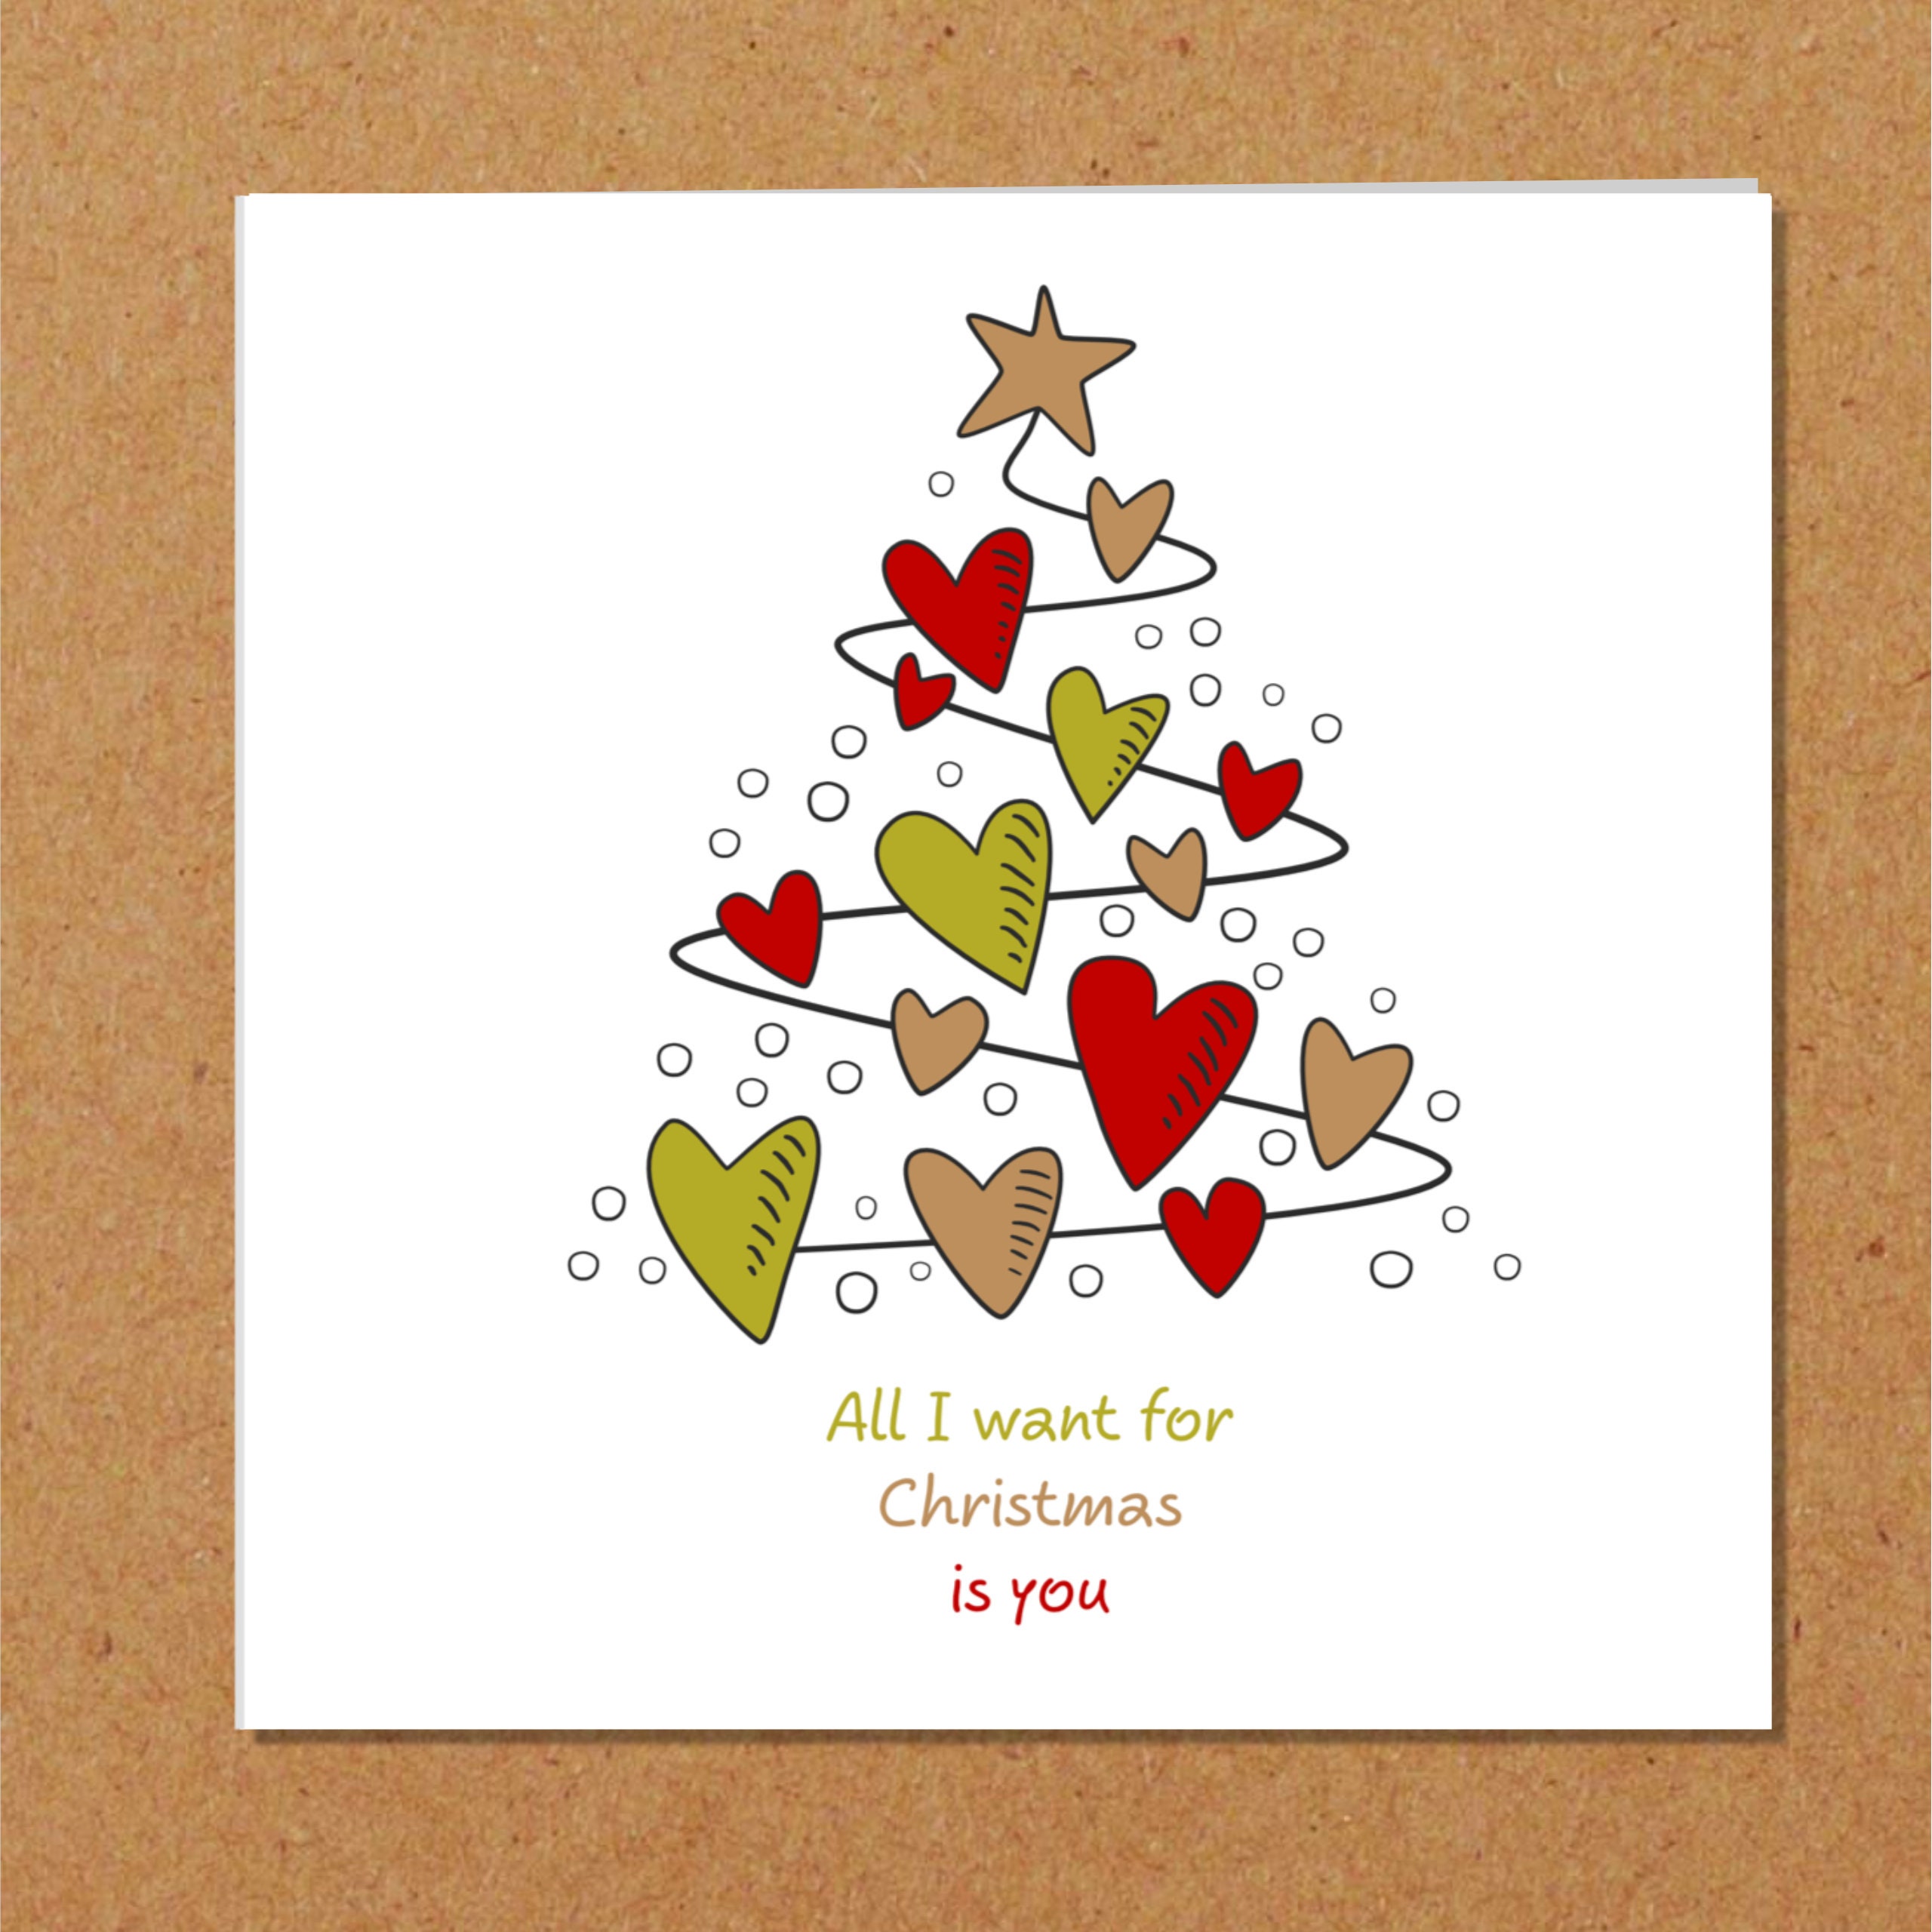 Handmade Button Bauble Christmas Cards Pack of 4 Crystal Gems 300 gsm Card